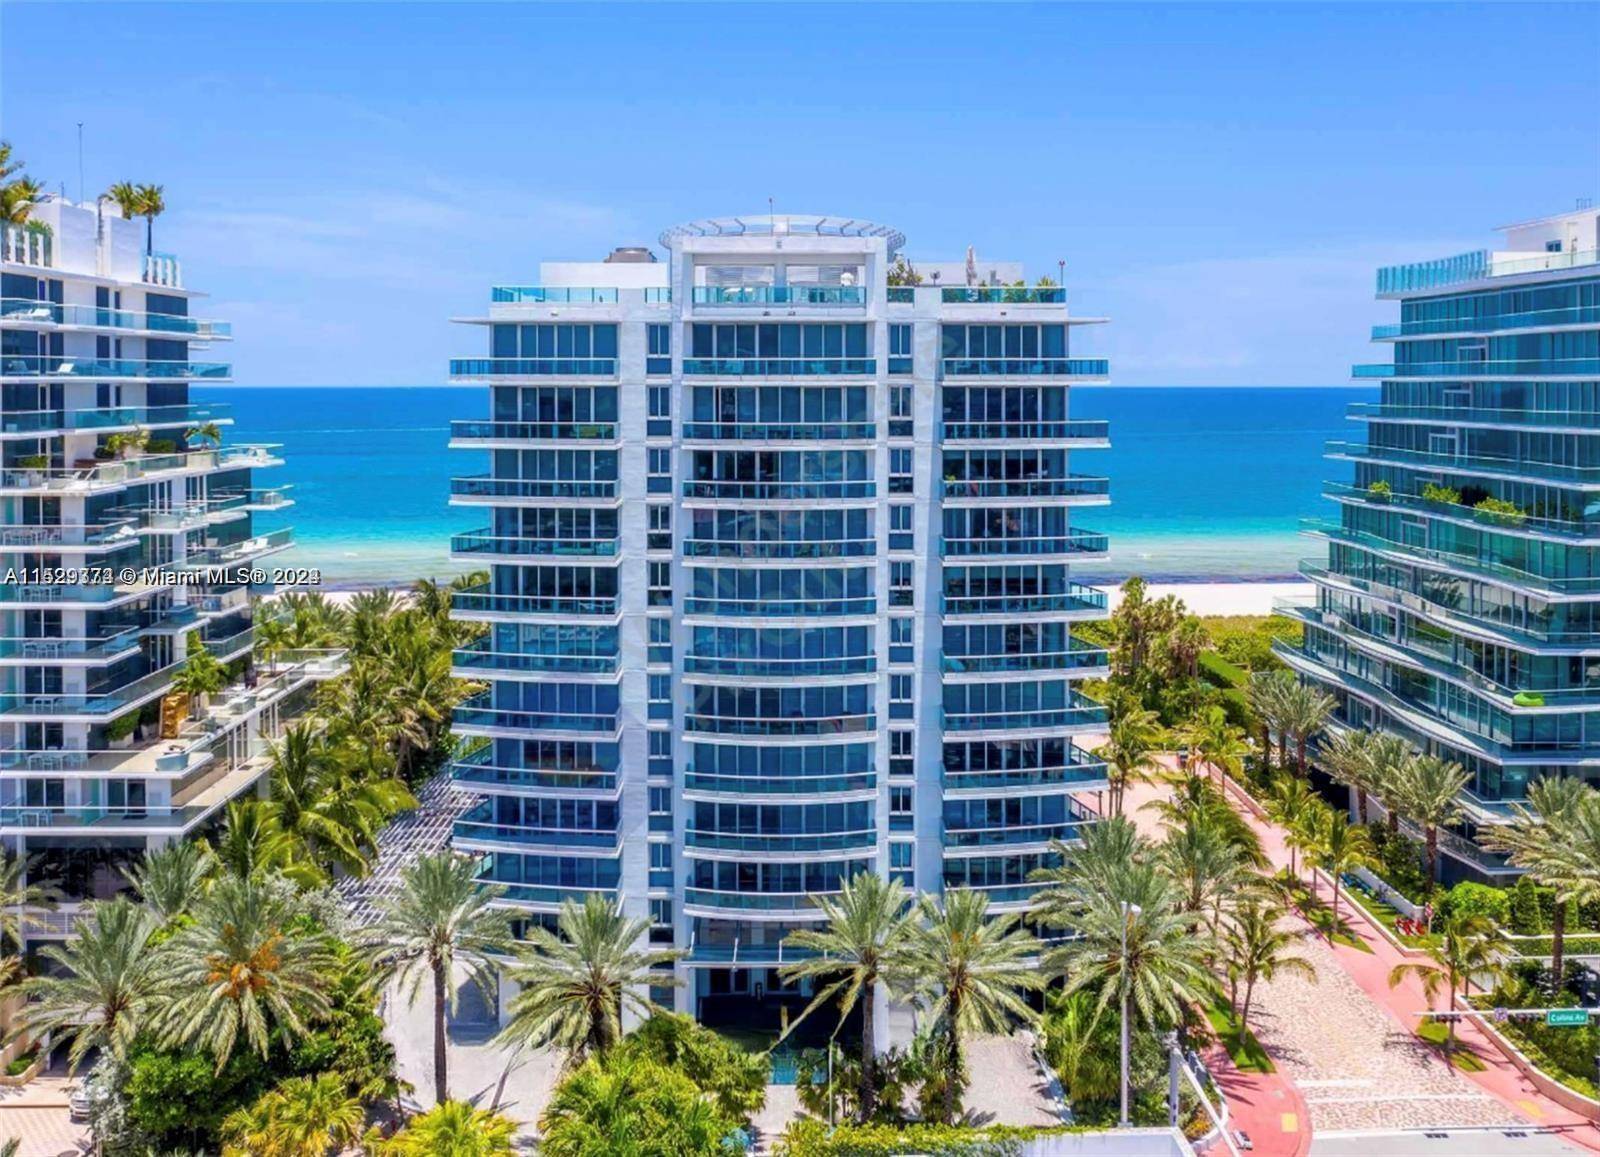 AVAILABLE BEGINNING 5 19 24 THE BEST MODERN BOUTIQUE LUXURY OCEANFRONT CONDO IN SURFSIDE IS AZURE.